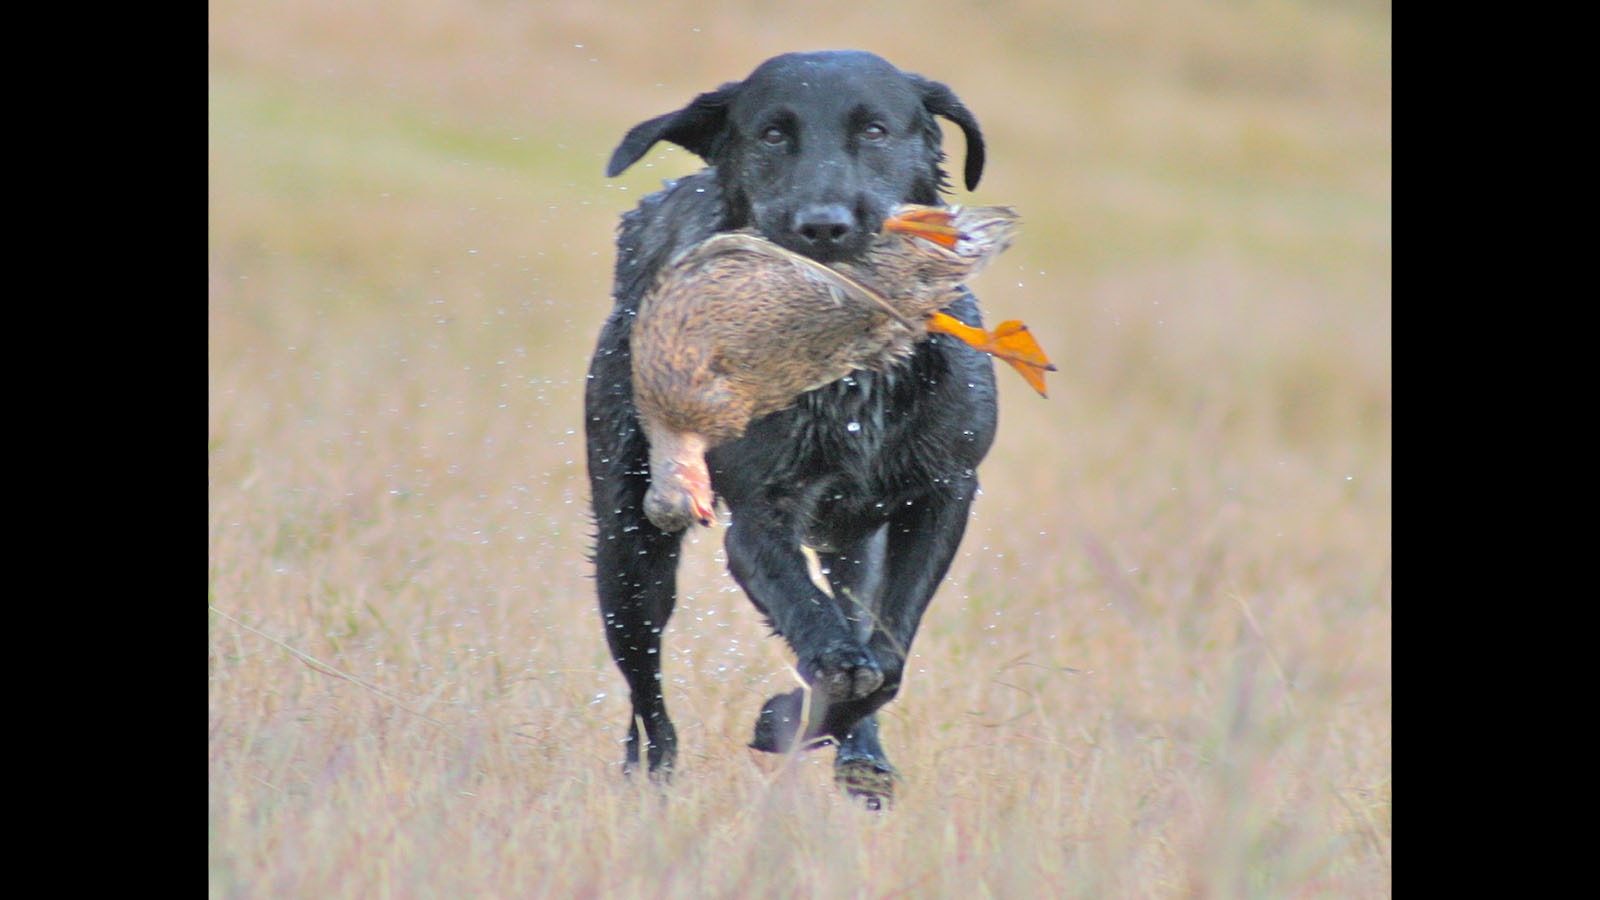 A Labrador retriever returns to its trainer with a duck during a recent field dog trial.